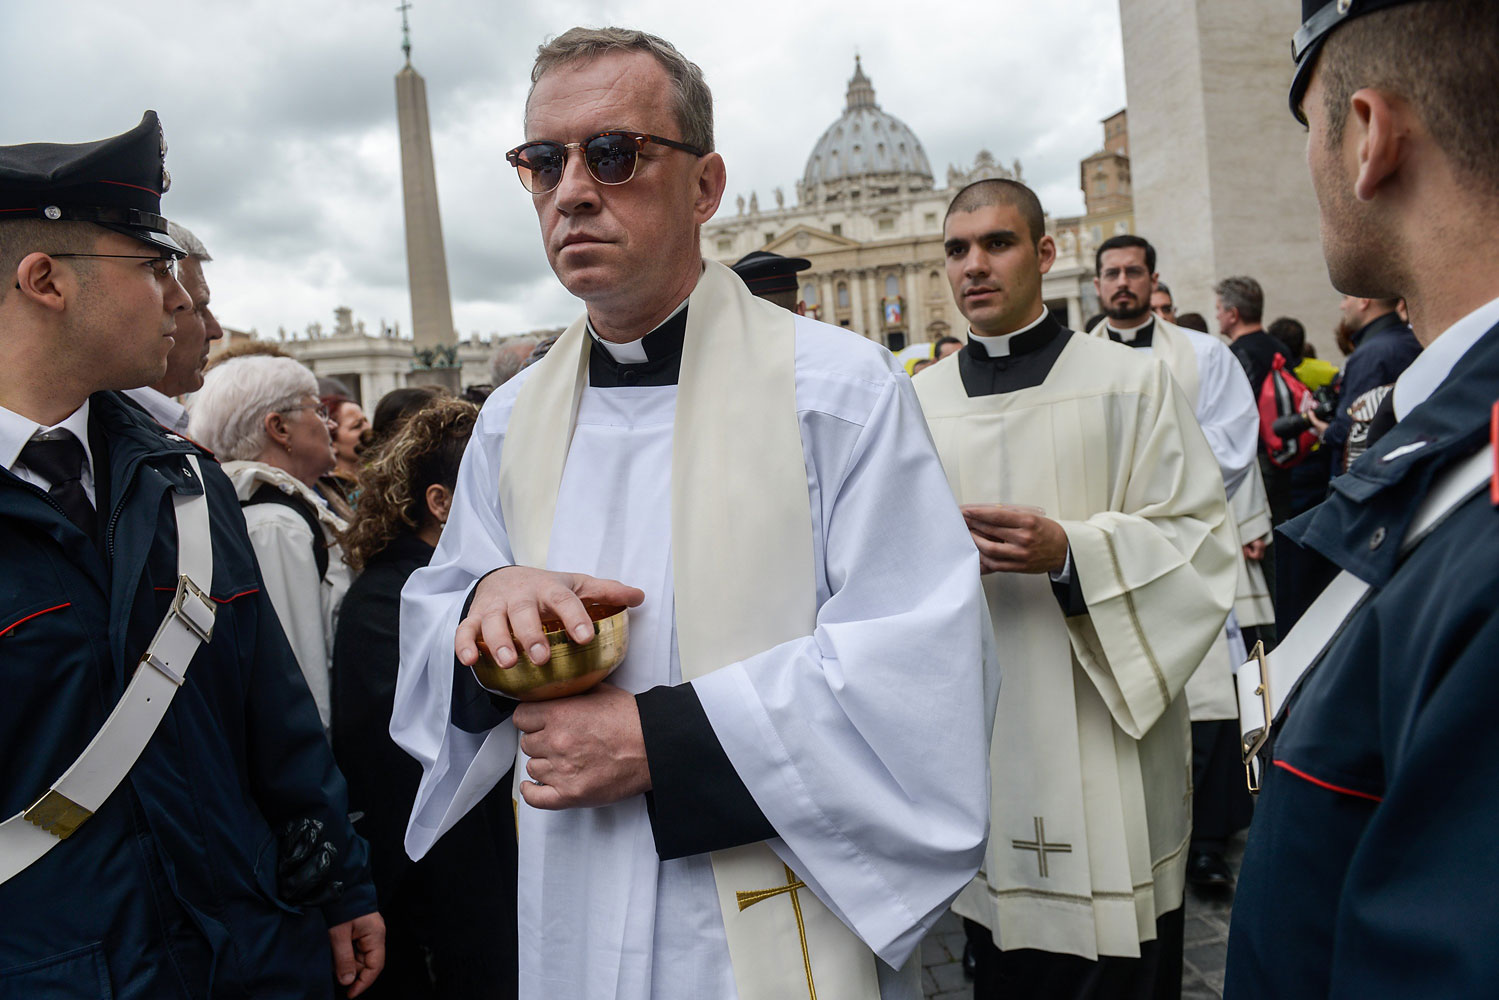 Priests arrive in Saint Peter's Square to give communion to pilgrims.